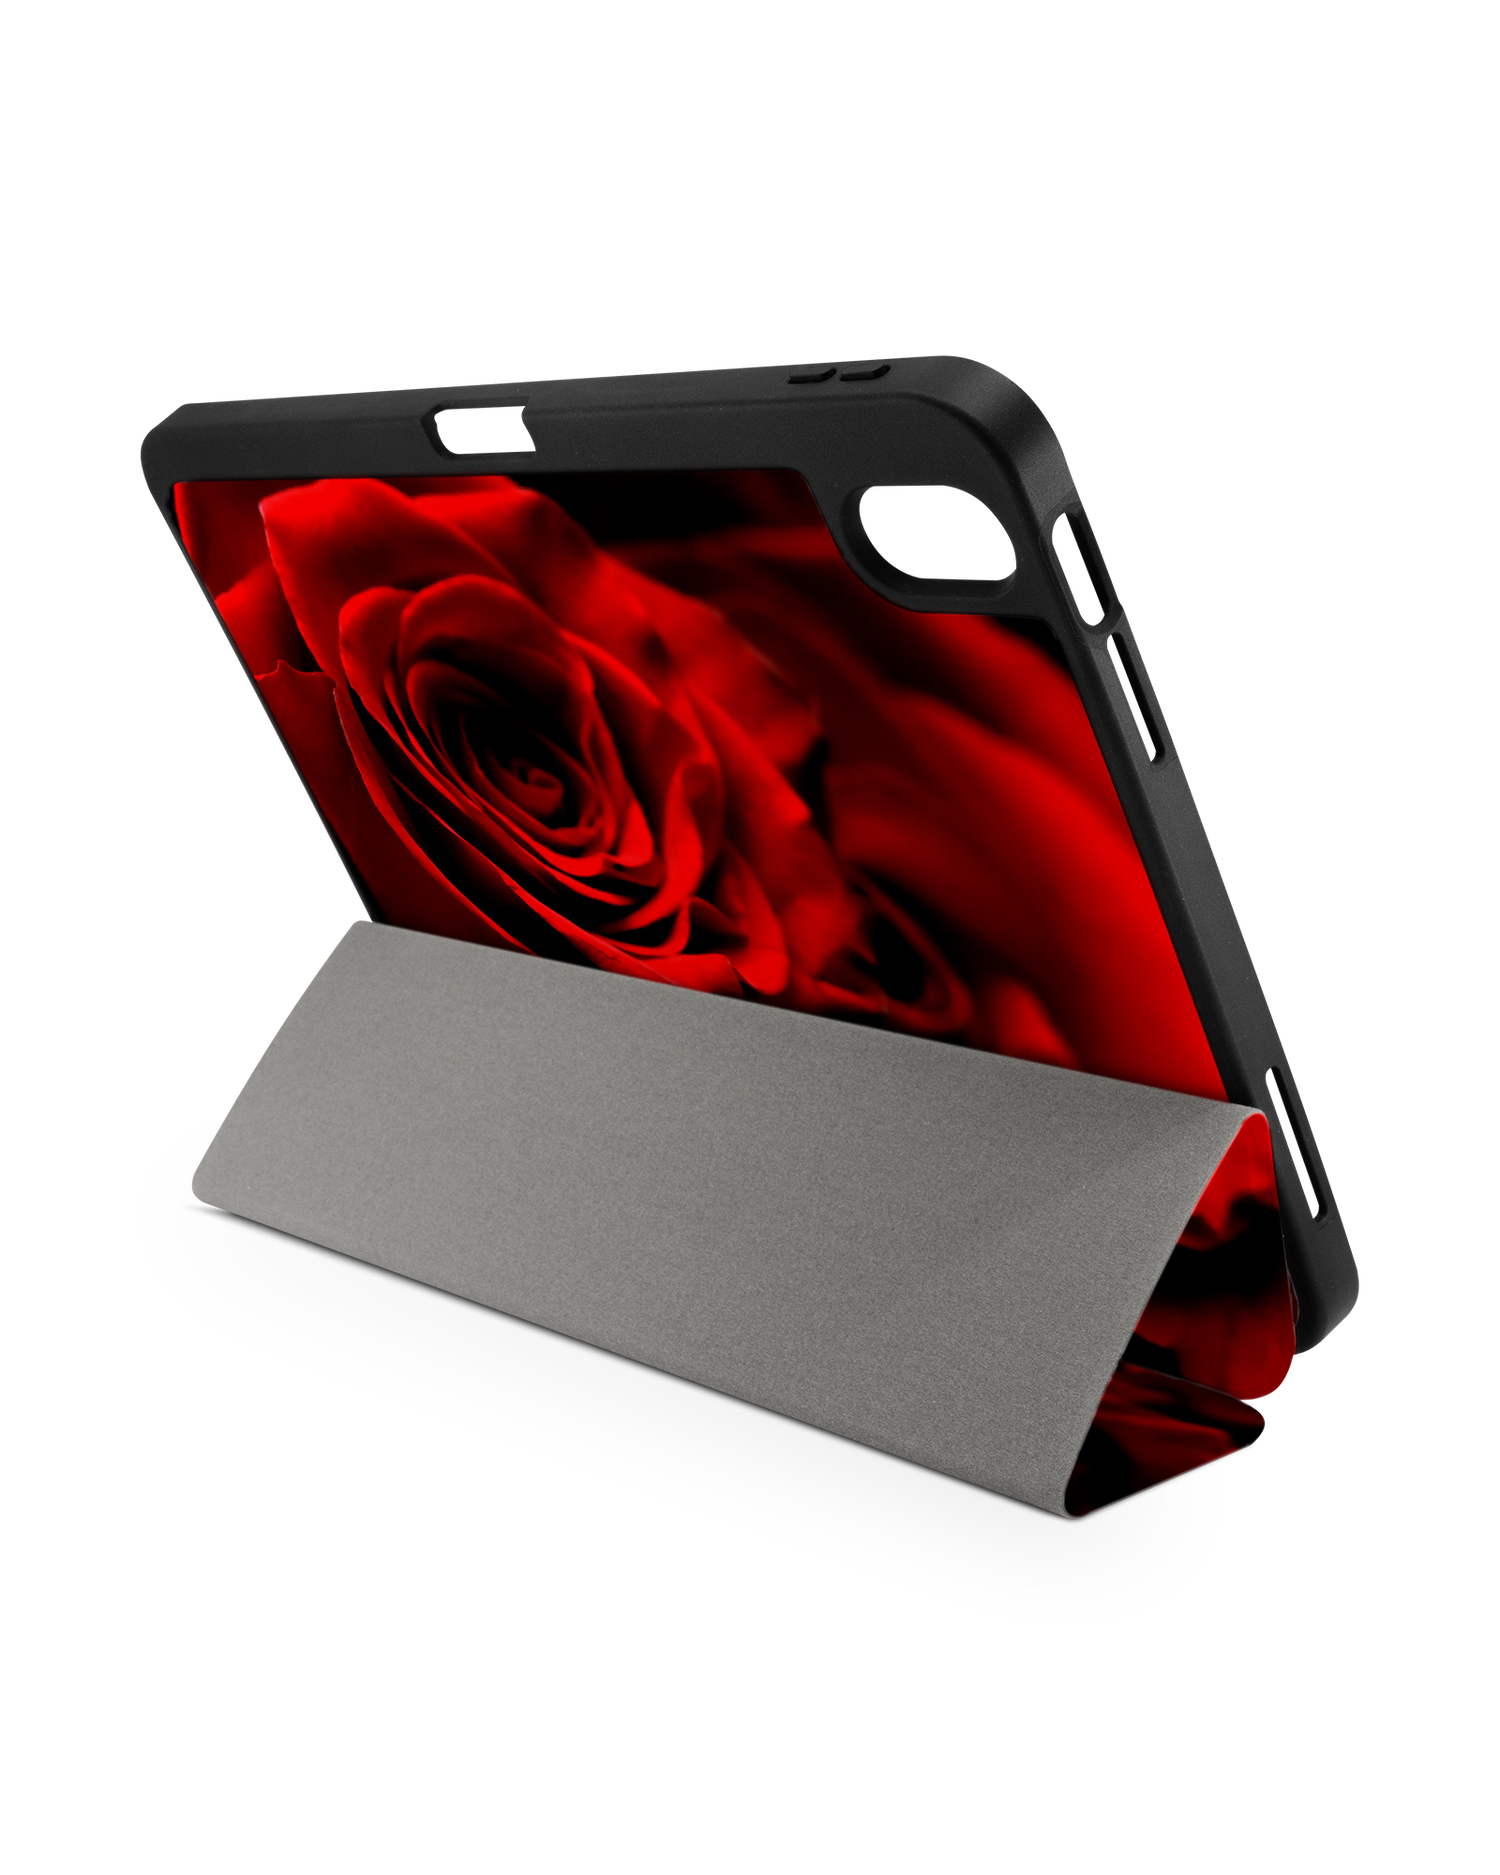 Red Roses iPad Case with Pencil Holder for Apple iPad (10th Generation): Set up in landscape format (back view)